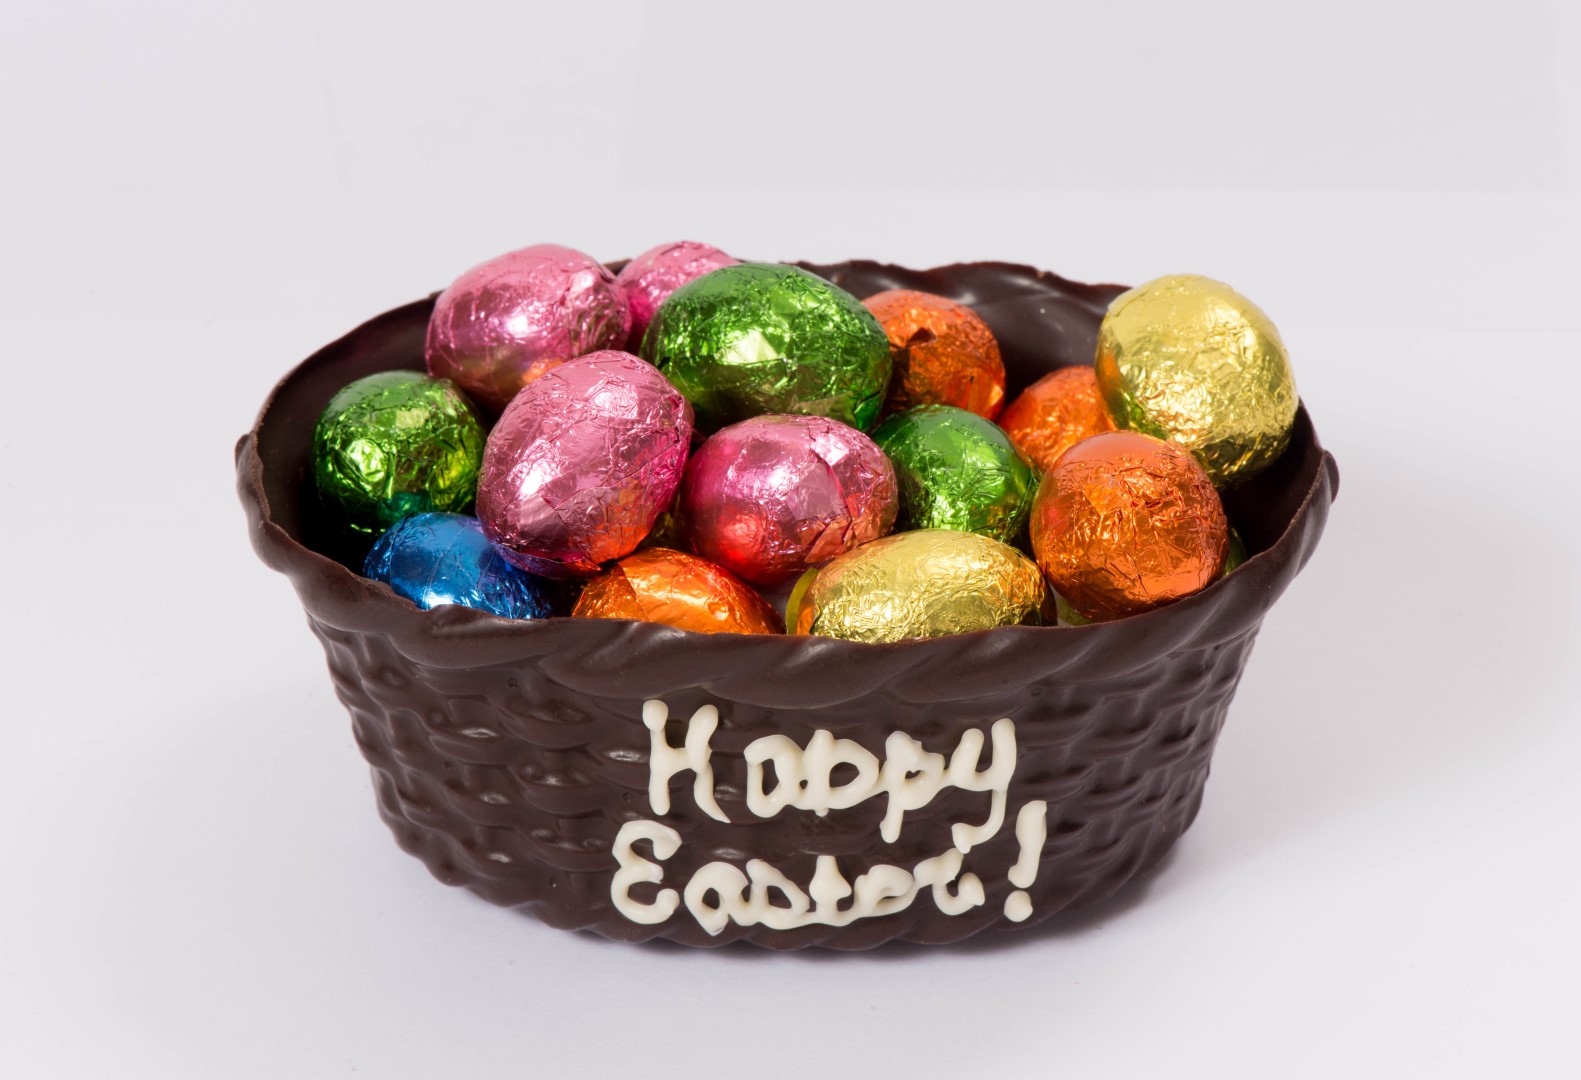 Chocolate Easter Basket Filled with Chocolate Eggs - Maitland Chocolate Factory